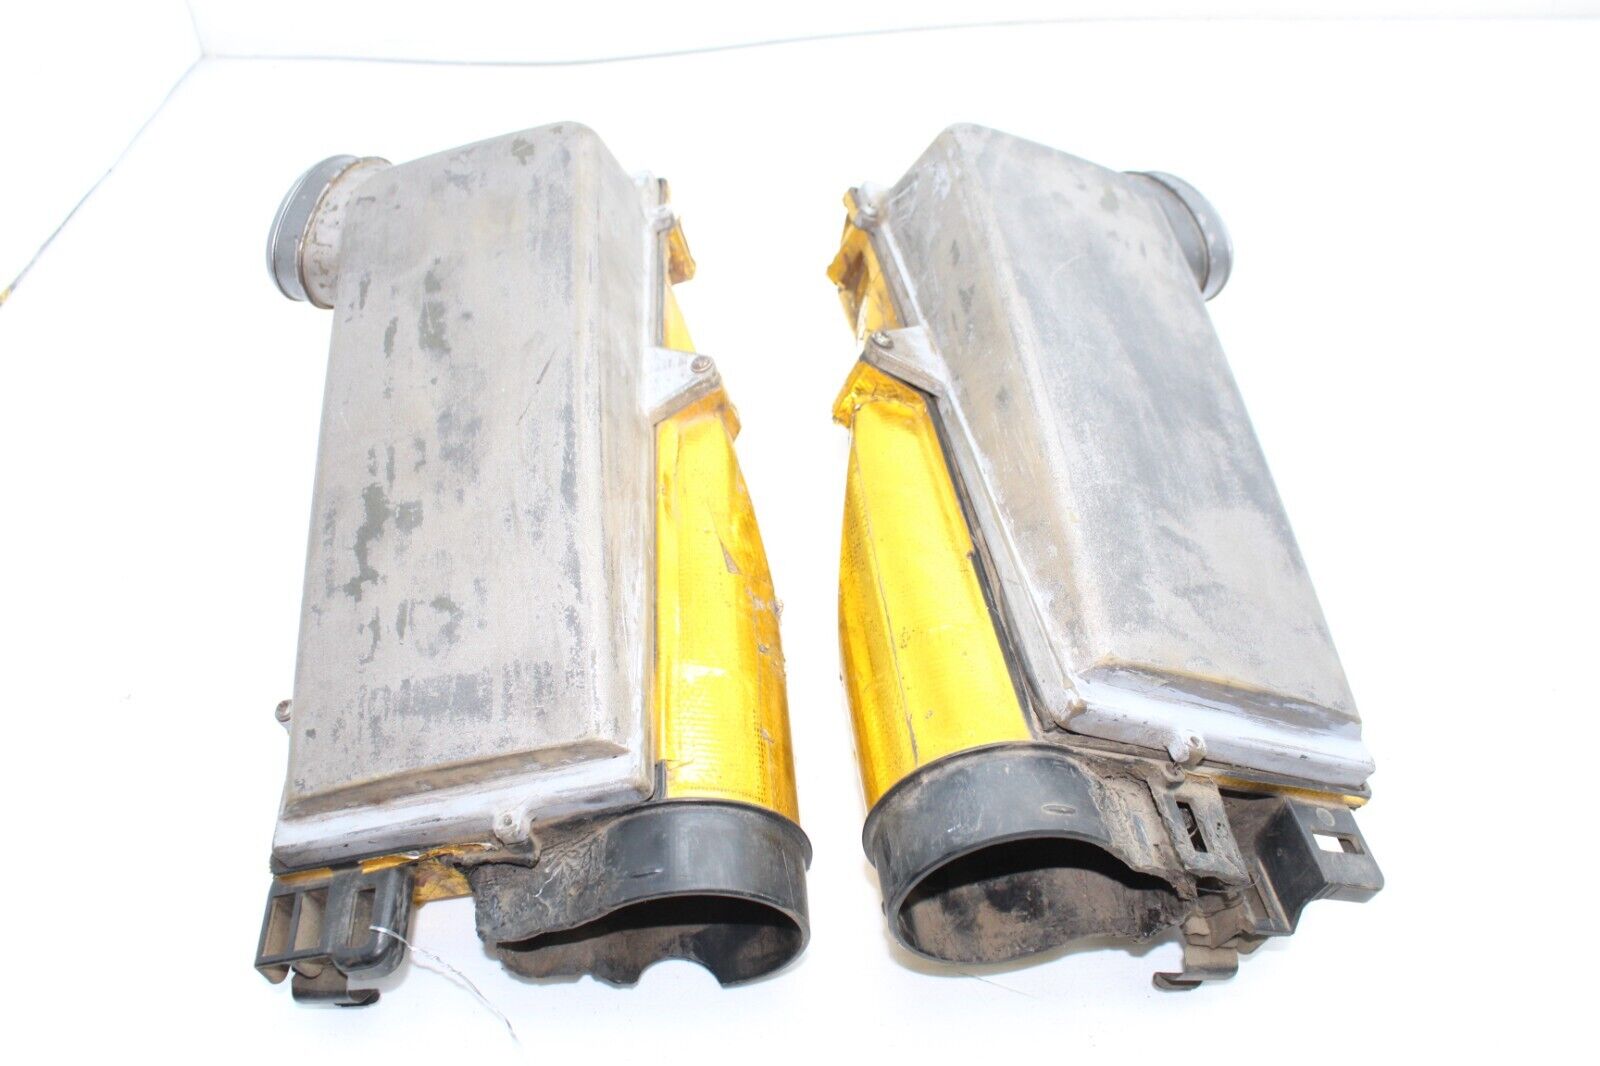 03-06 MERCEDES-BENZ CL55 AMG AIR CLEANER FILTER HOUSINGS LEFT & RIGHT PAIR Q7694